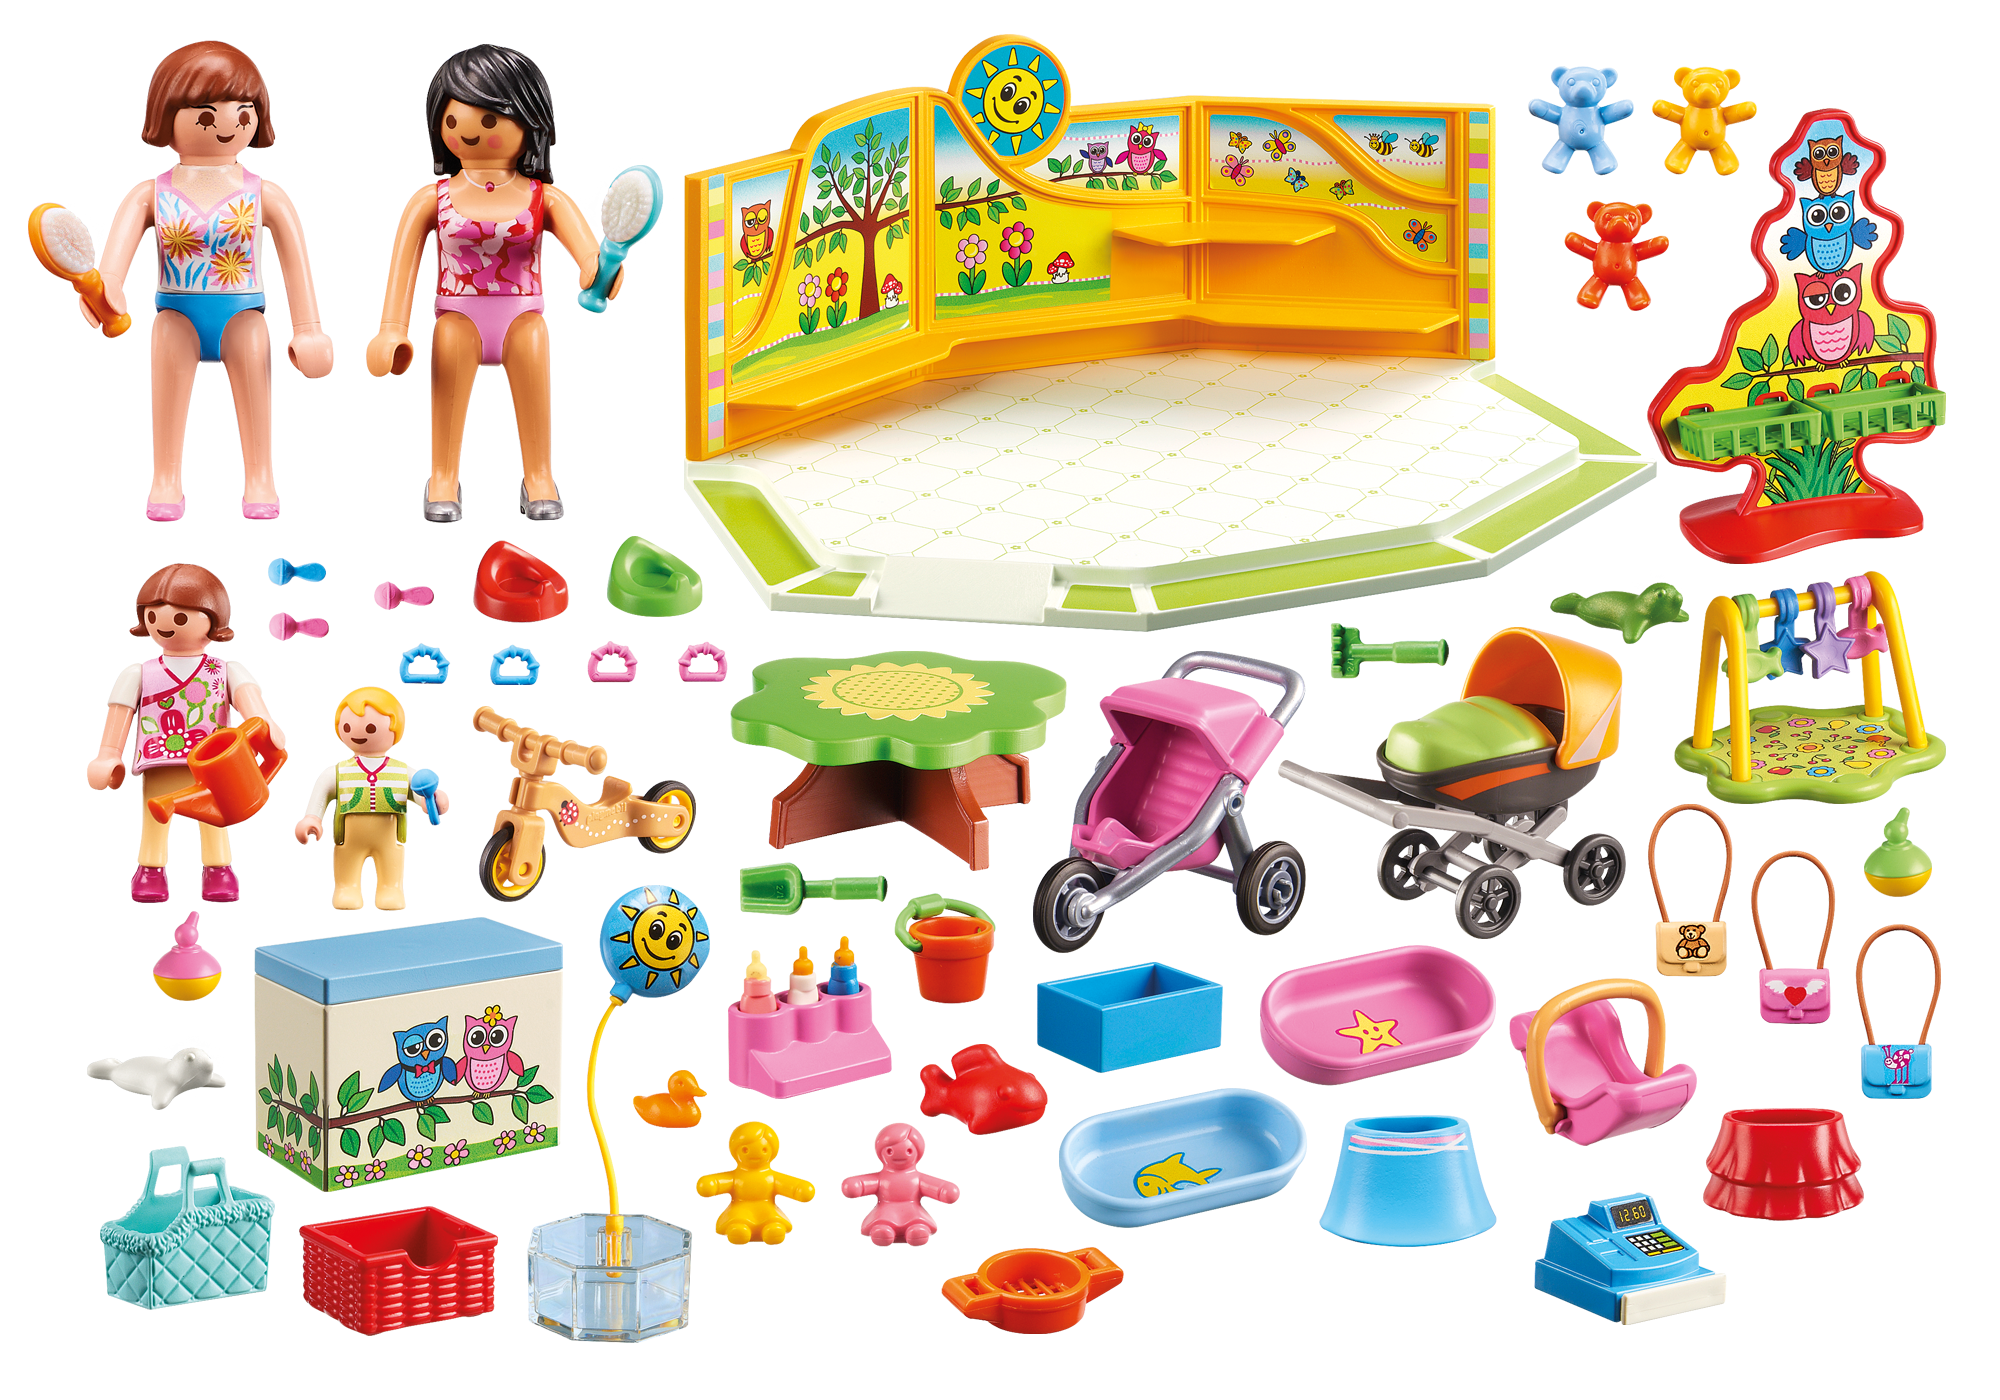 magasin playmobil notice